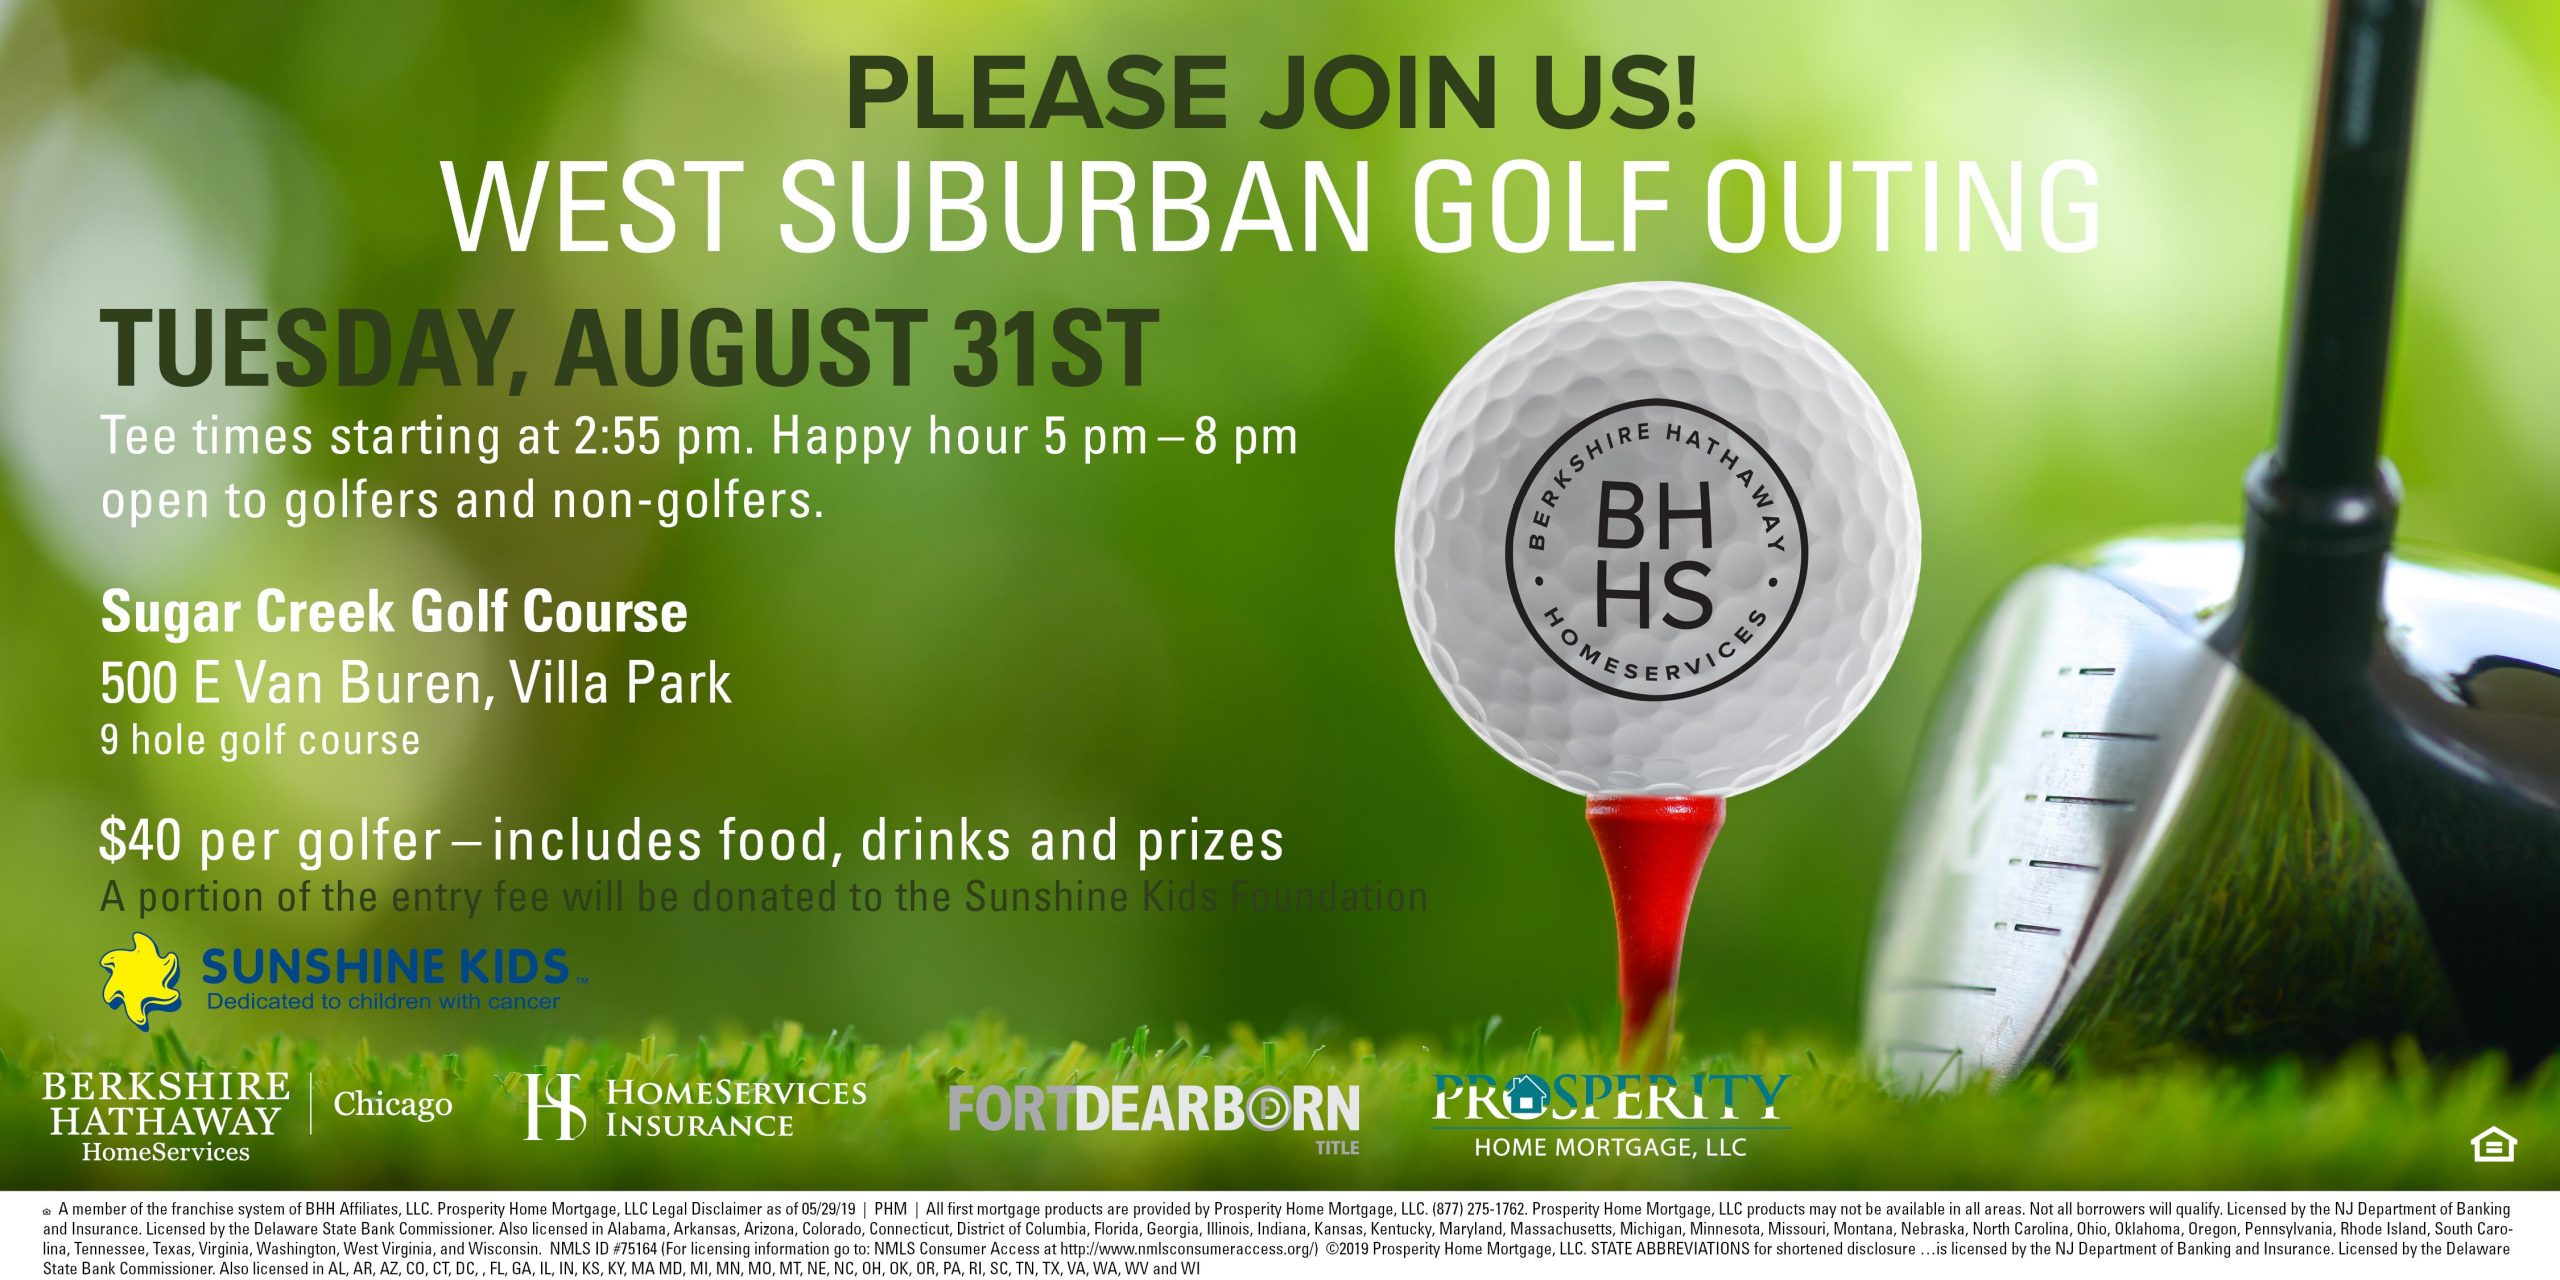 2021 West Suburban Golf Outing